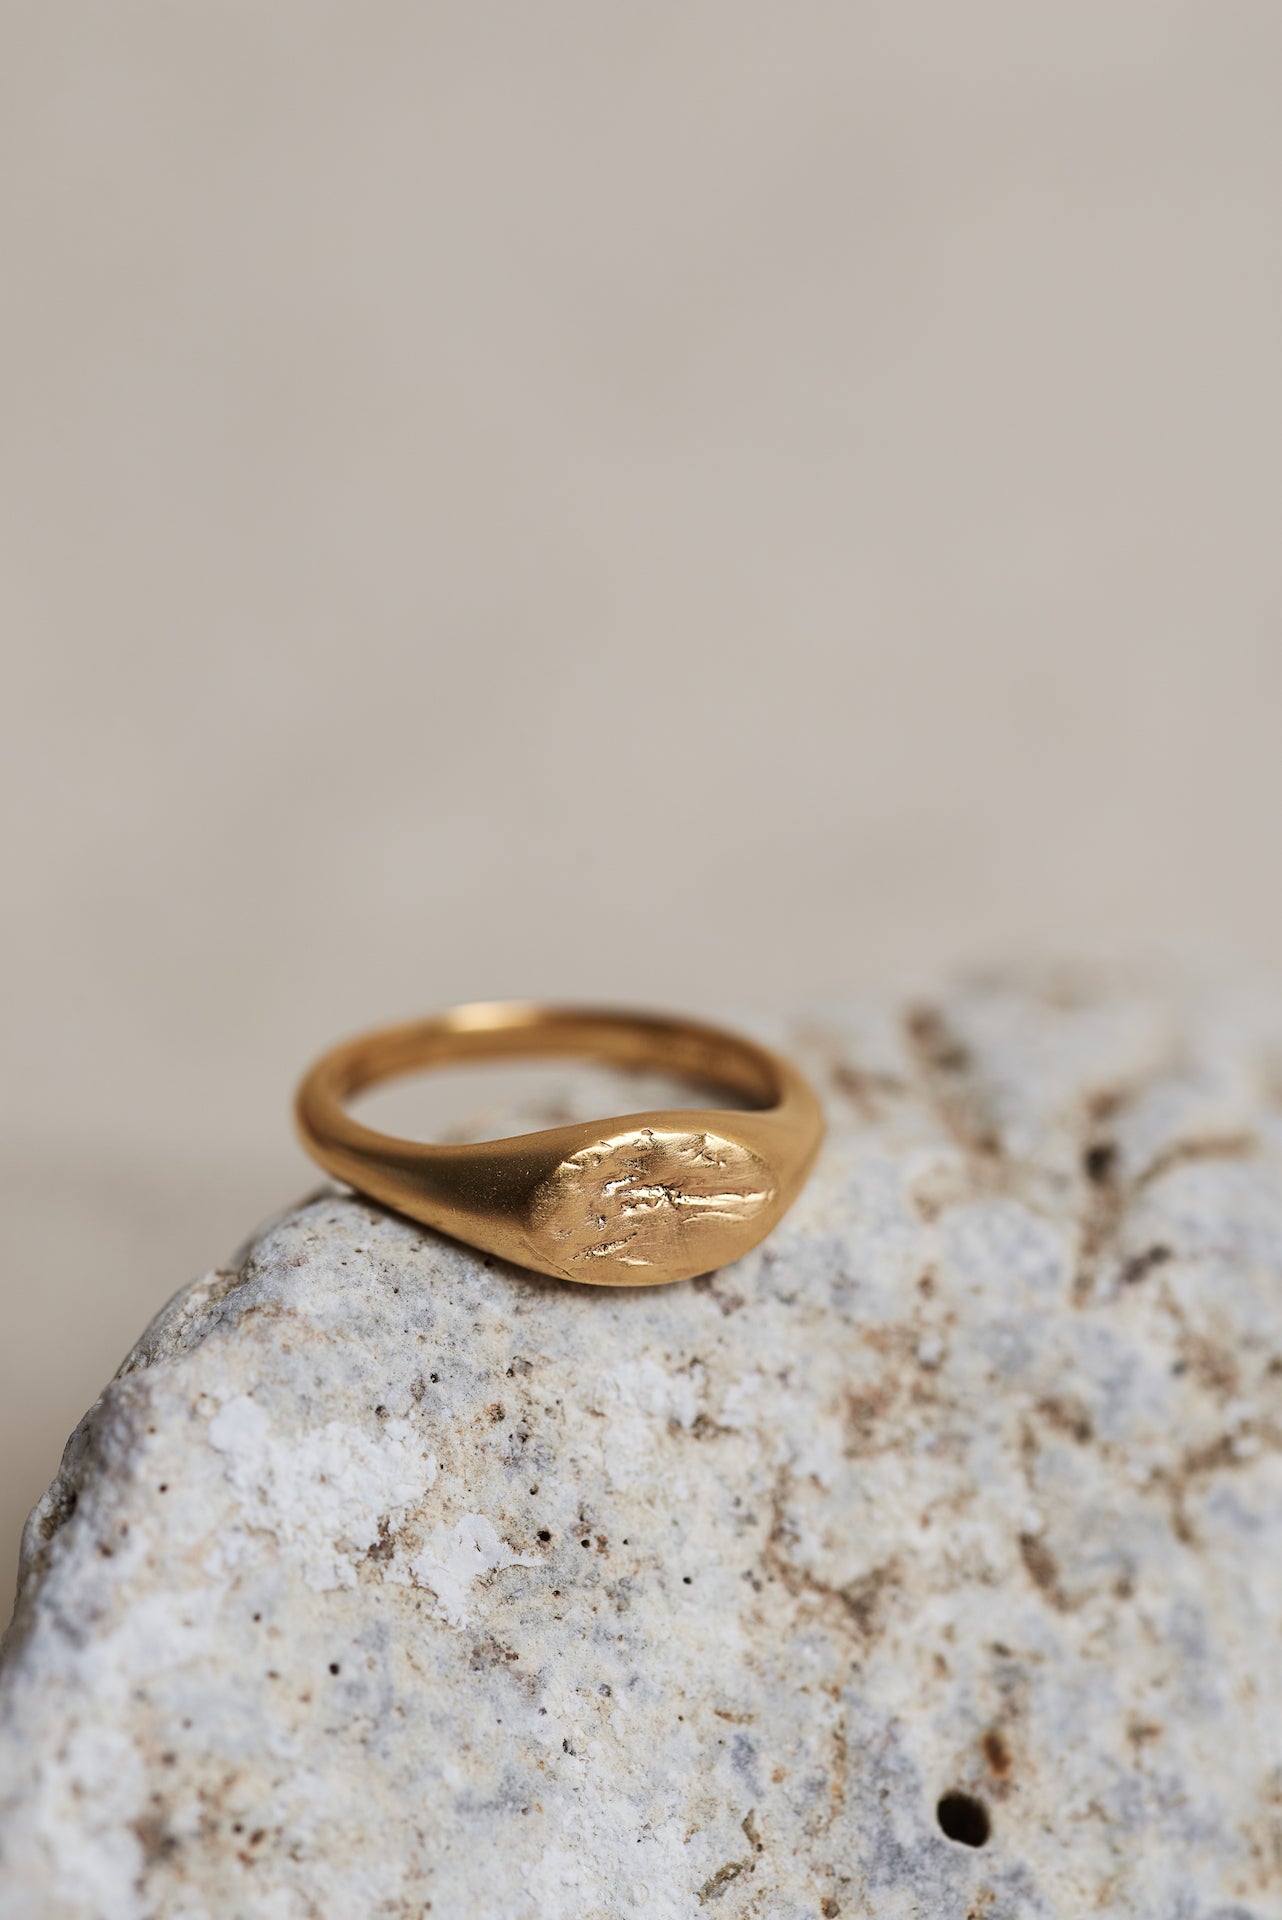 Designed by Megan Collins, the Unity Signet ring is a reminder to create balance between your role within your community and your own flavour of individuality.